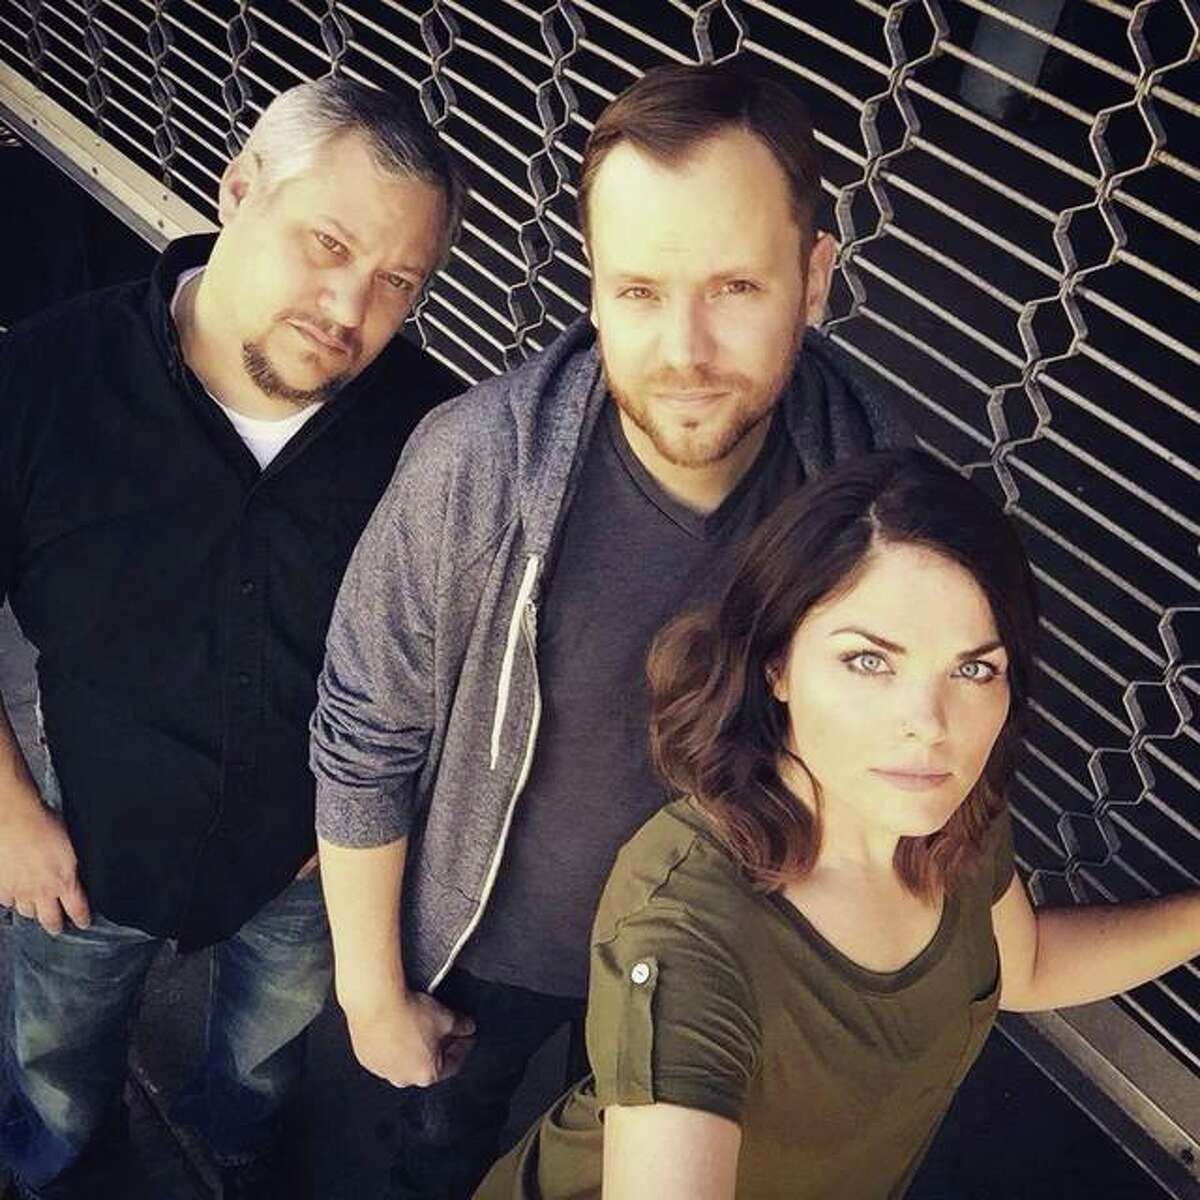 From left, bassist Dan Deck, drummer Drew Mader and vocalist/keyboardist Hope Mader make up the Alton outfit “Hope and Therapy.”